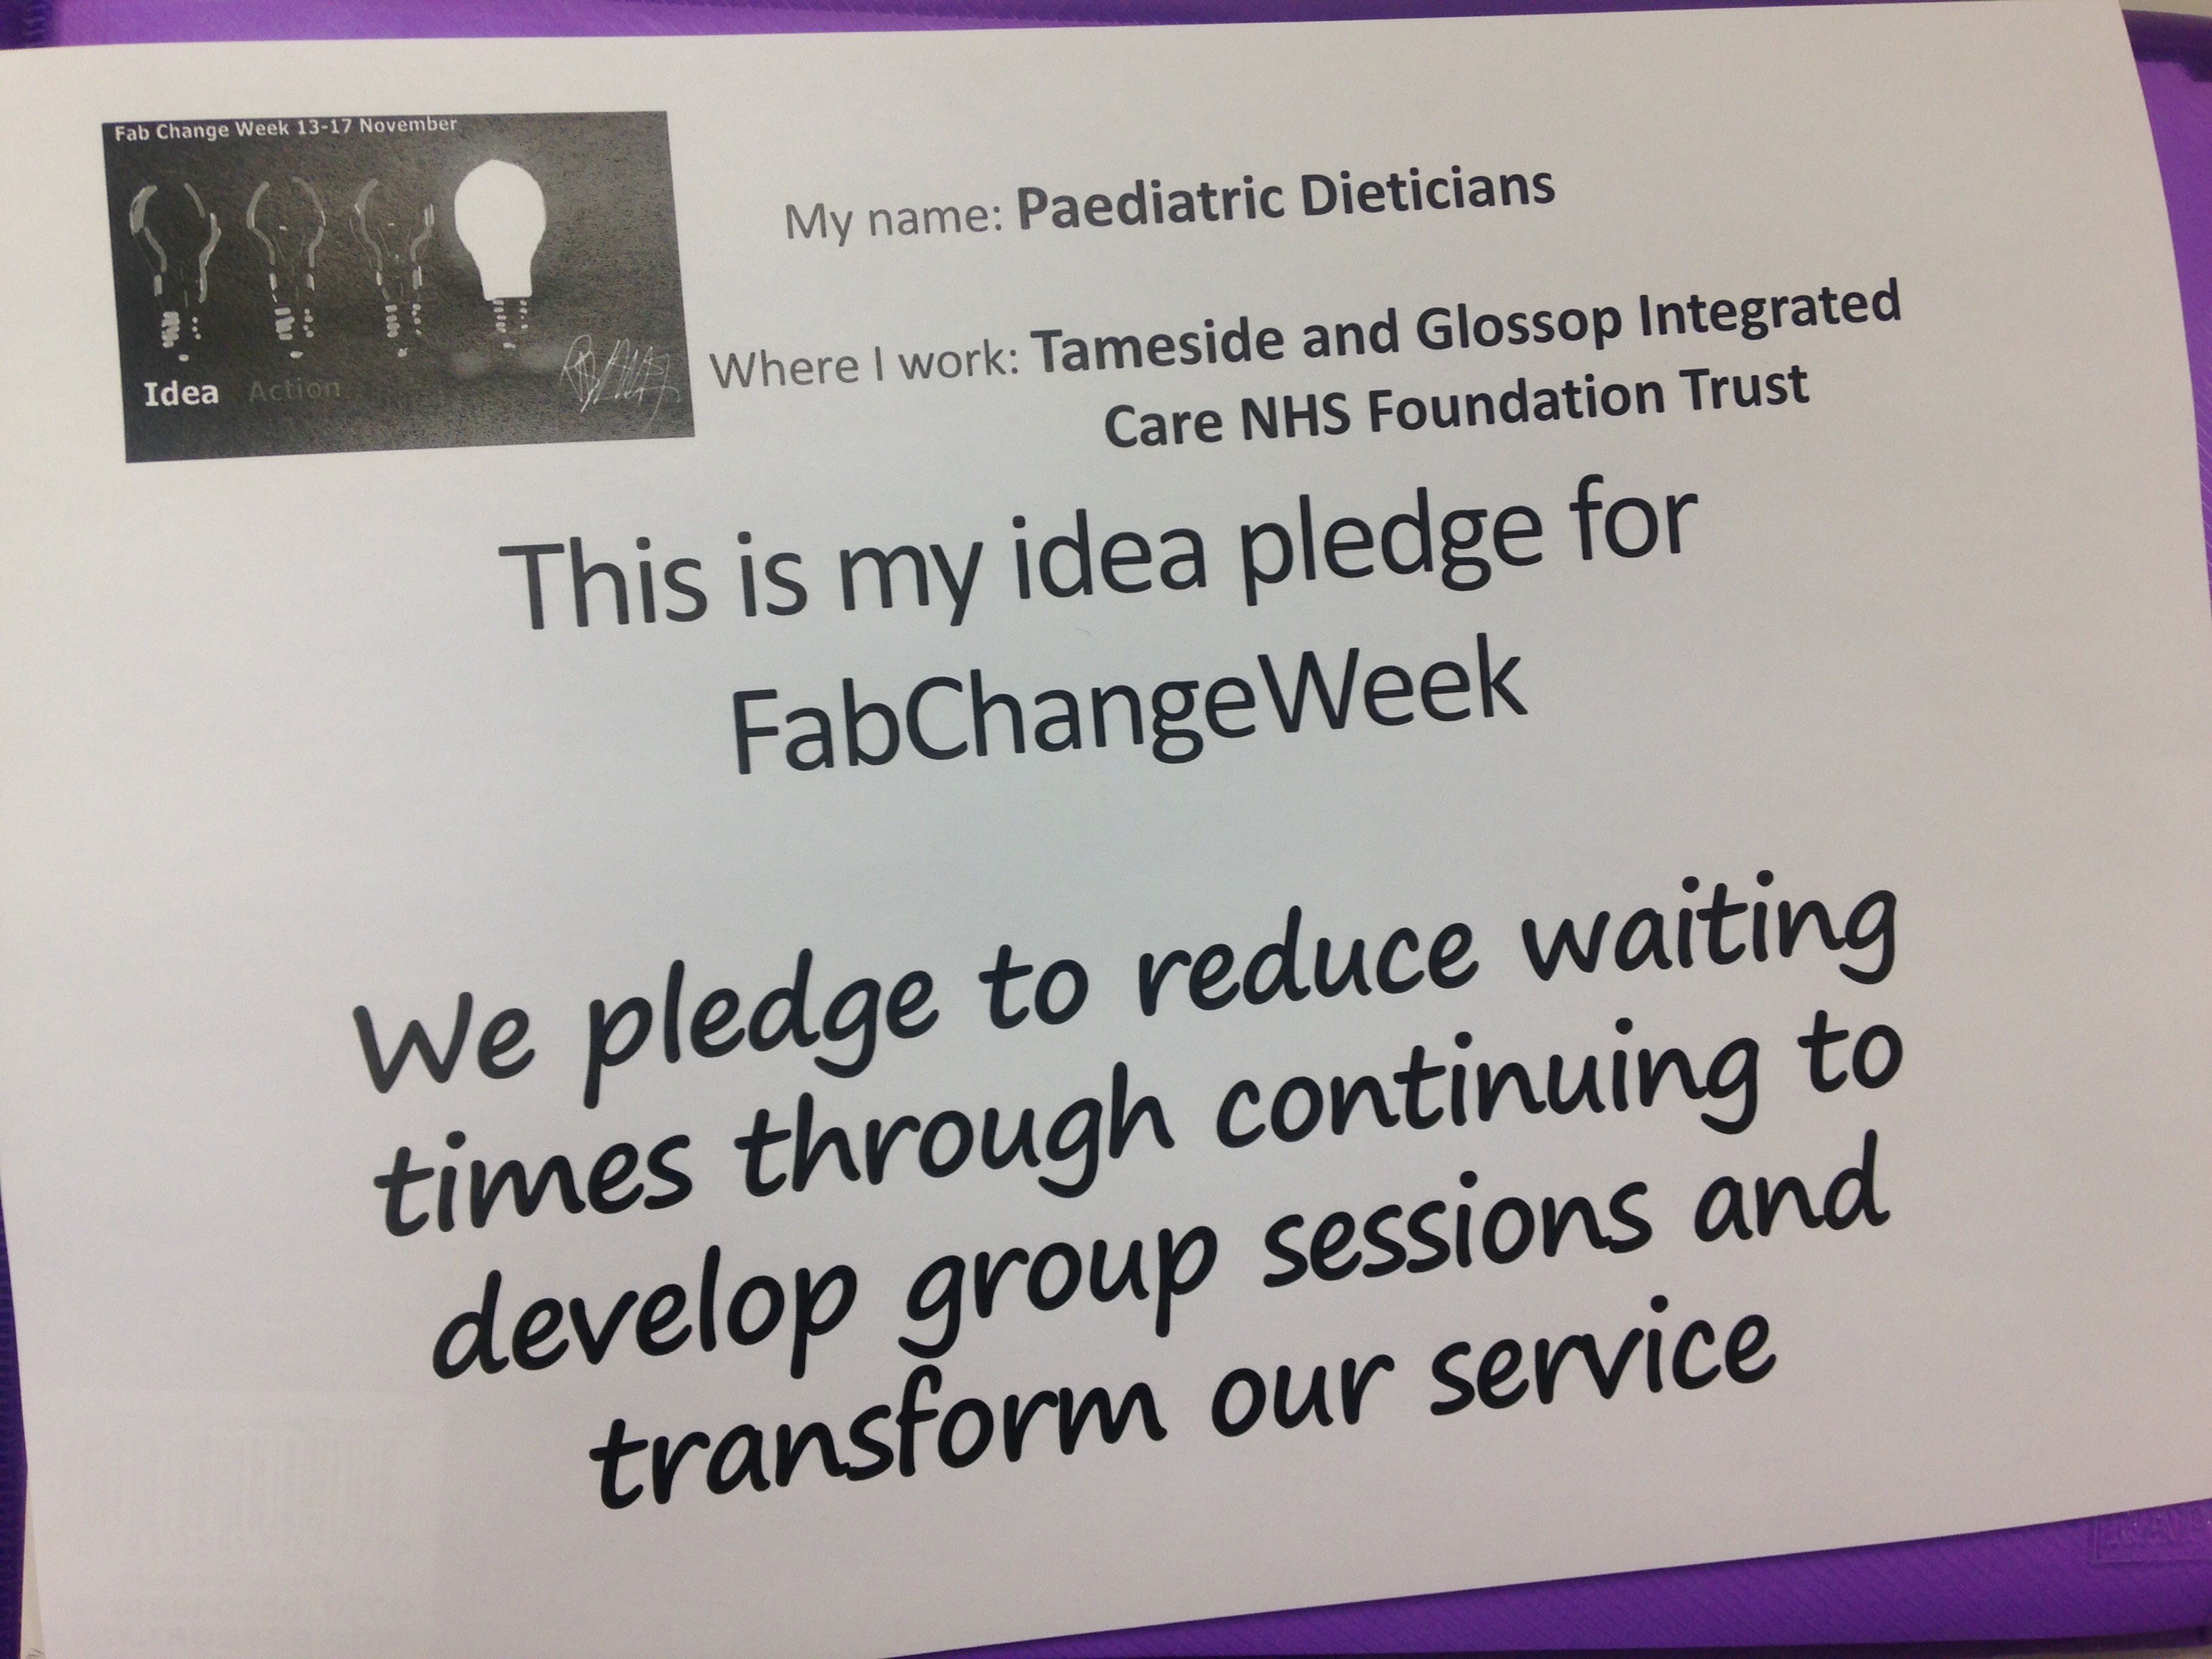 TAmeside and Glossop NHS Foundation Trust featured image